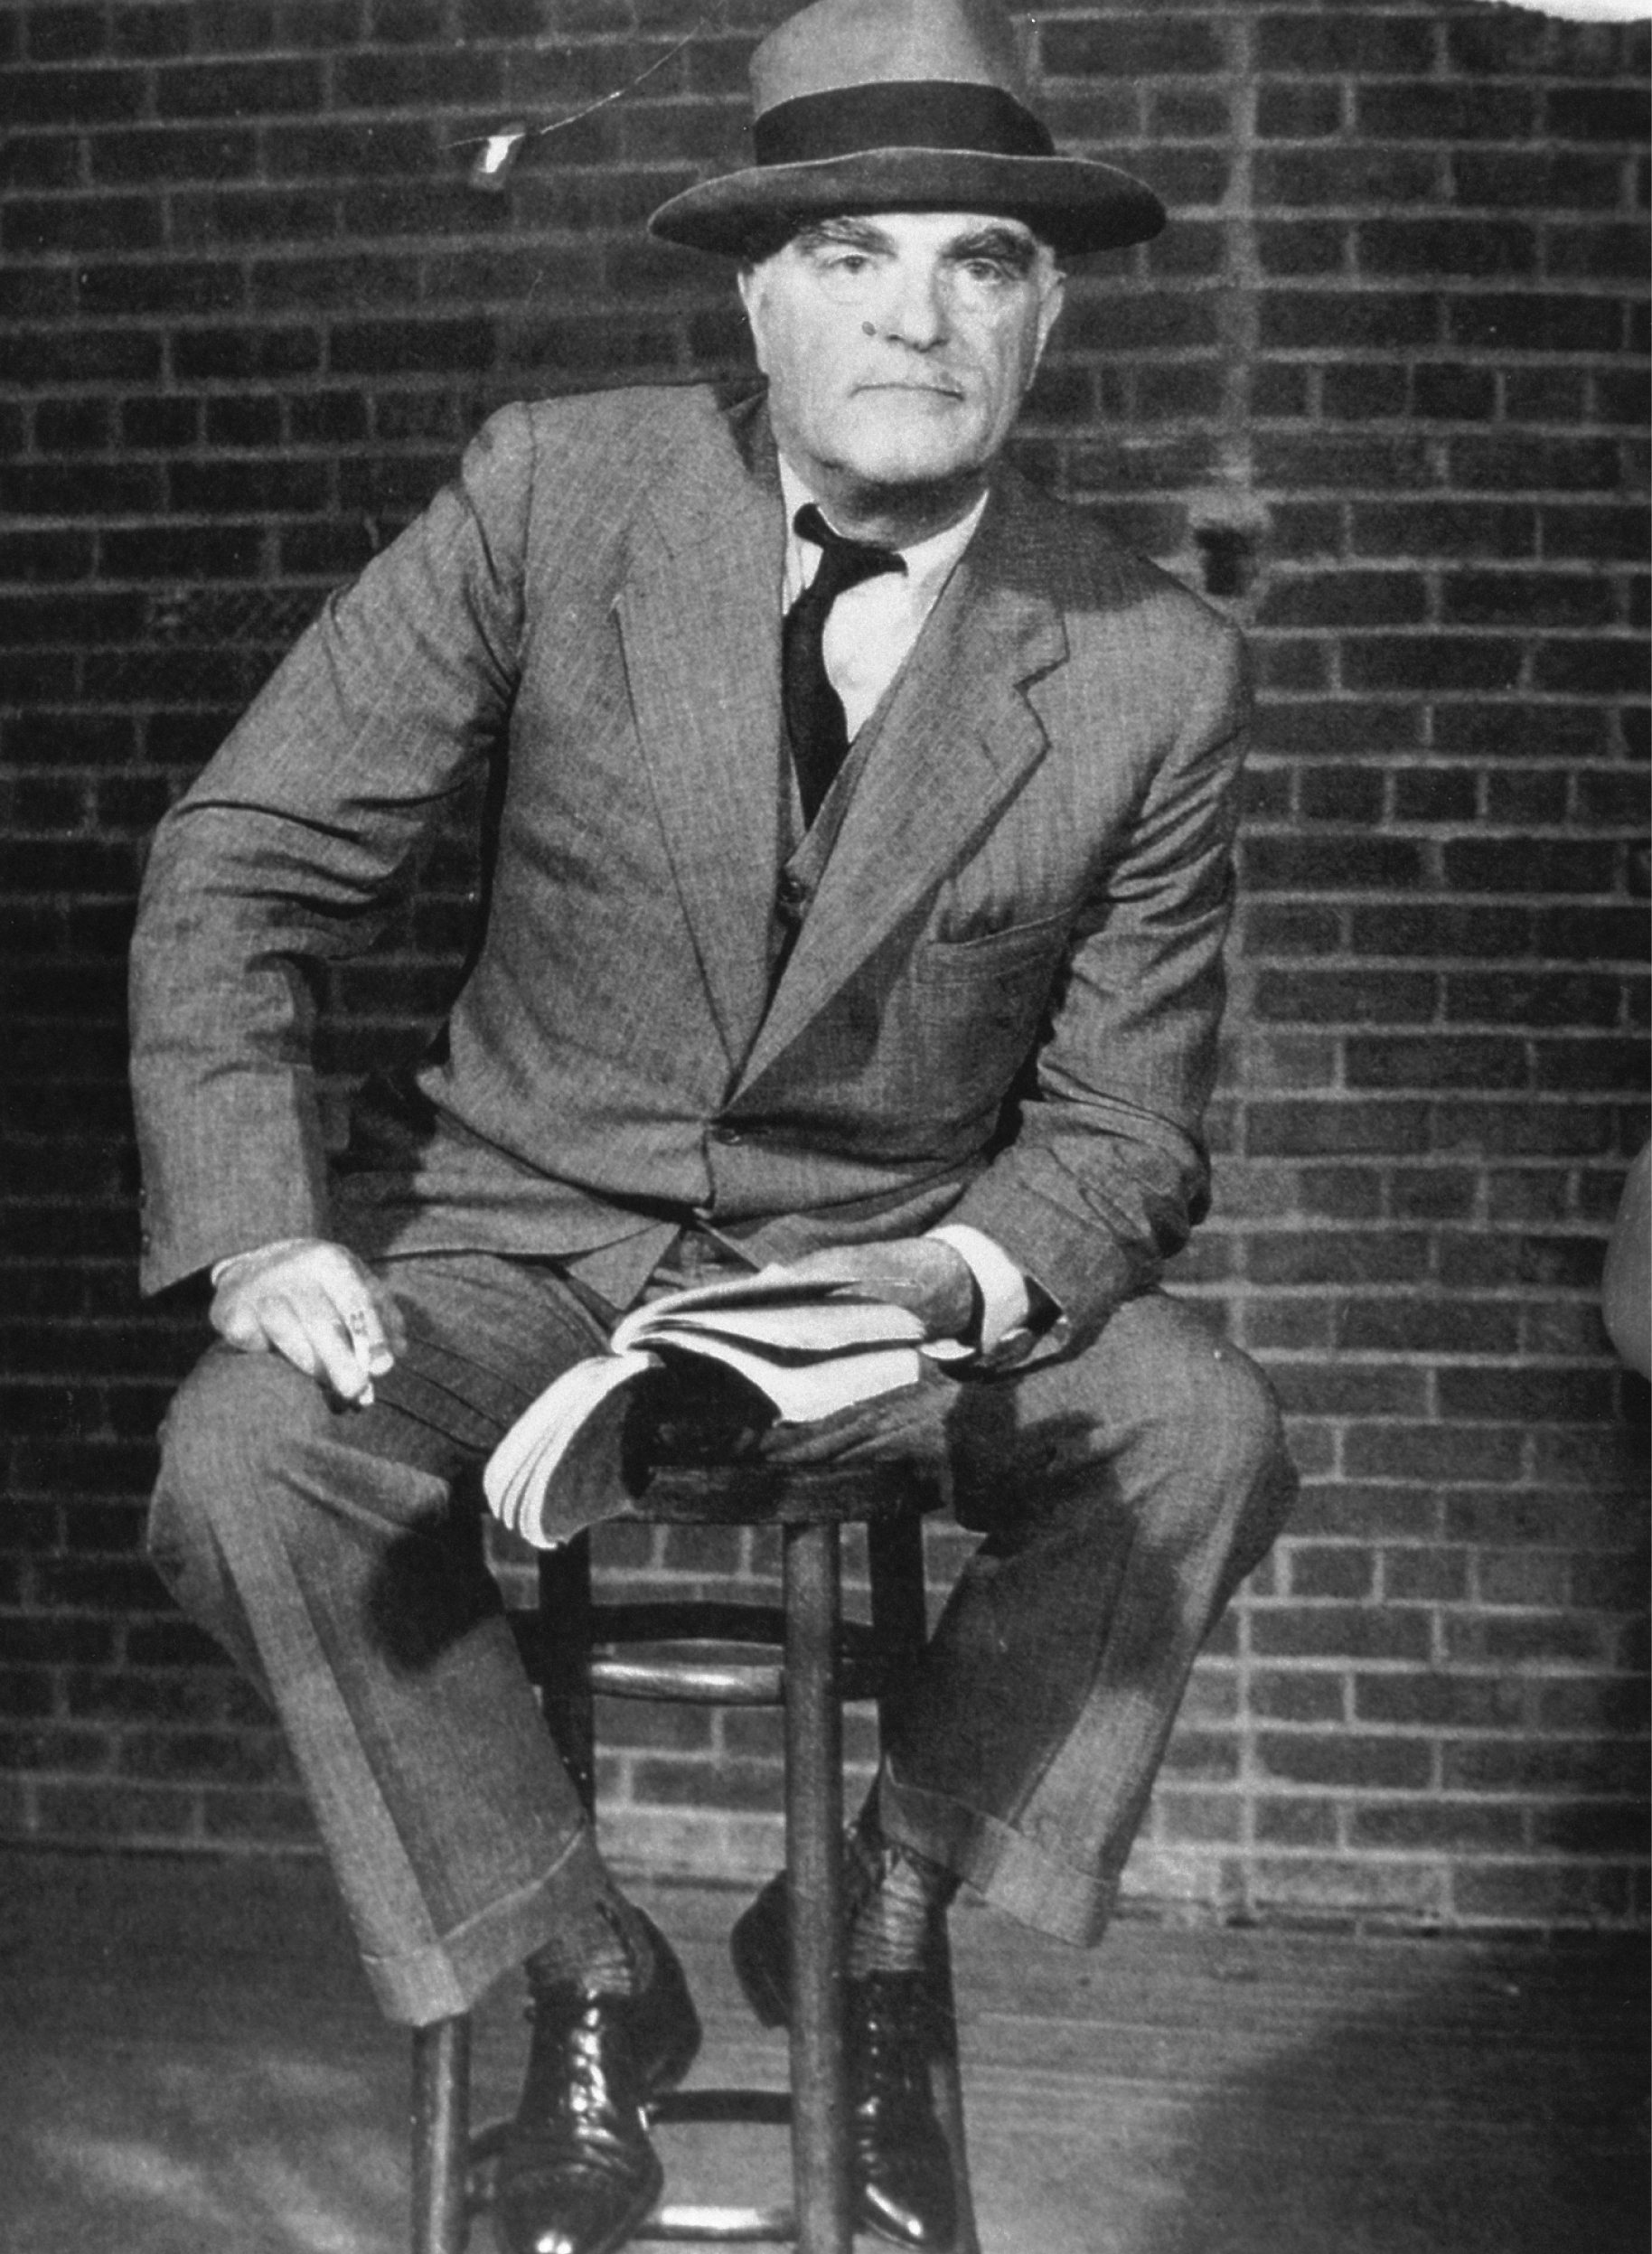 Man in suit and hat sitting on barstool holding a book on stage. 